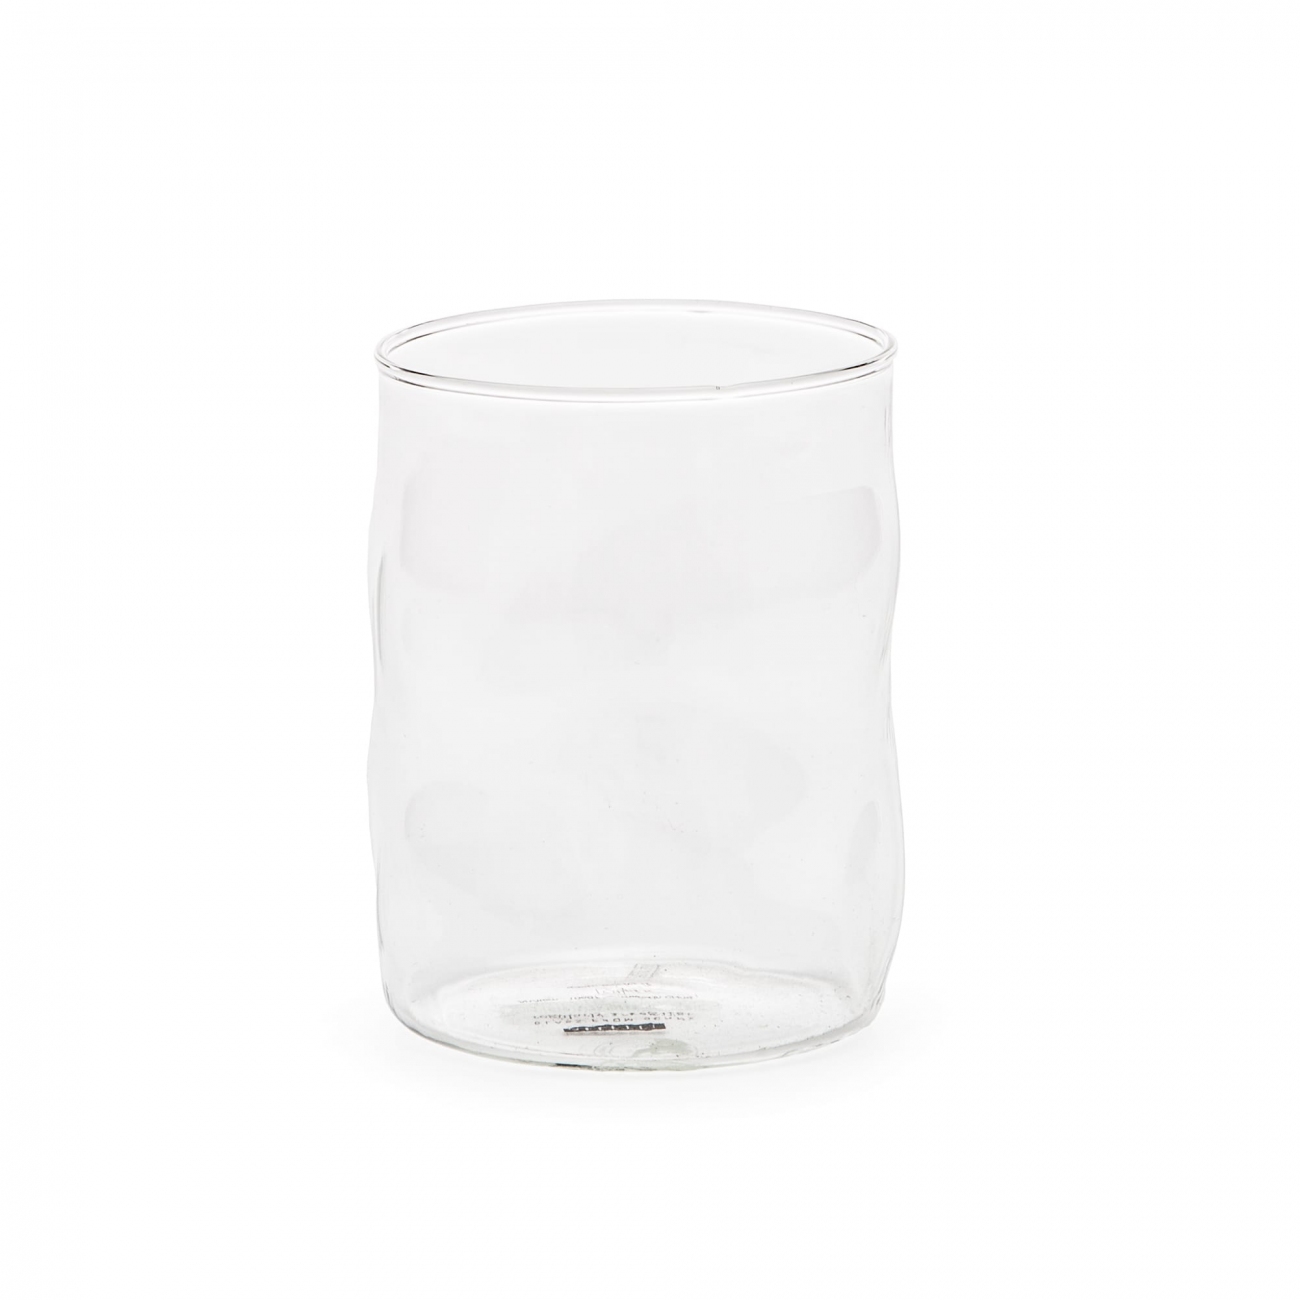 SELETTI GLASS FROM SONNY BICCHIERE